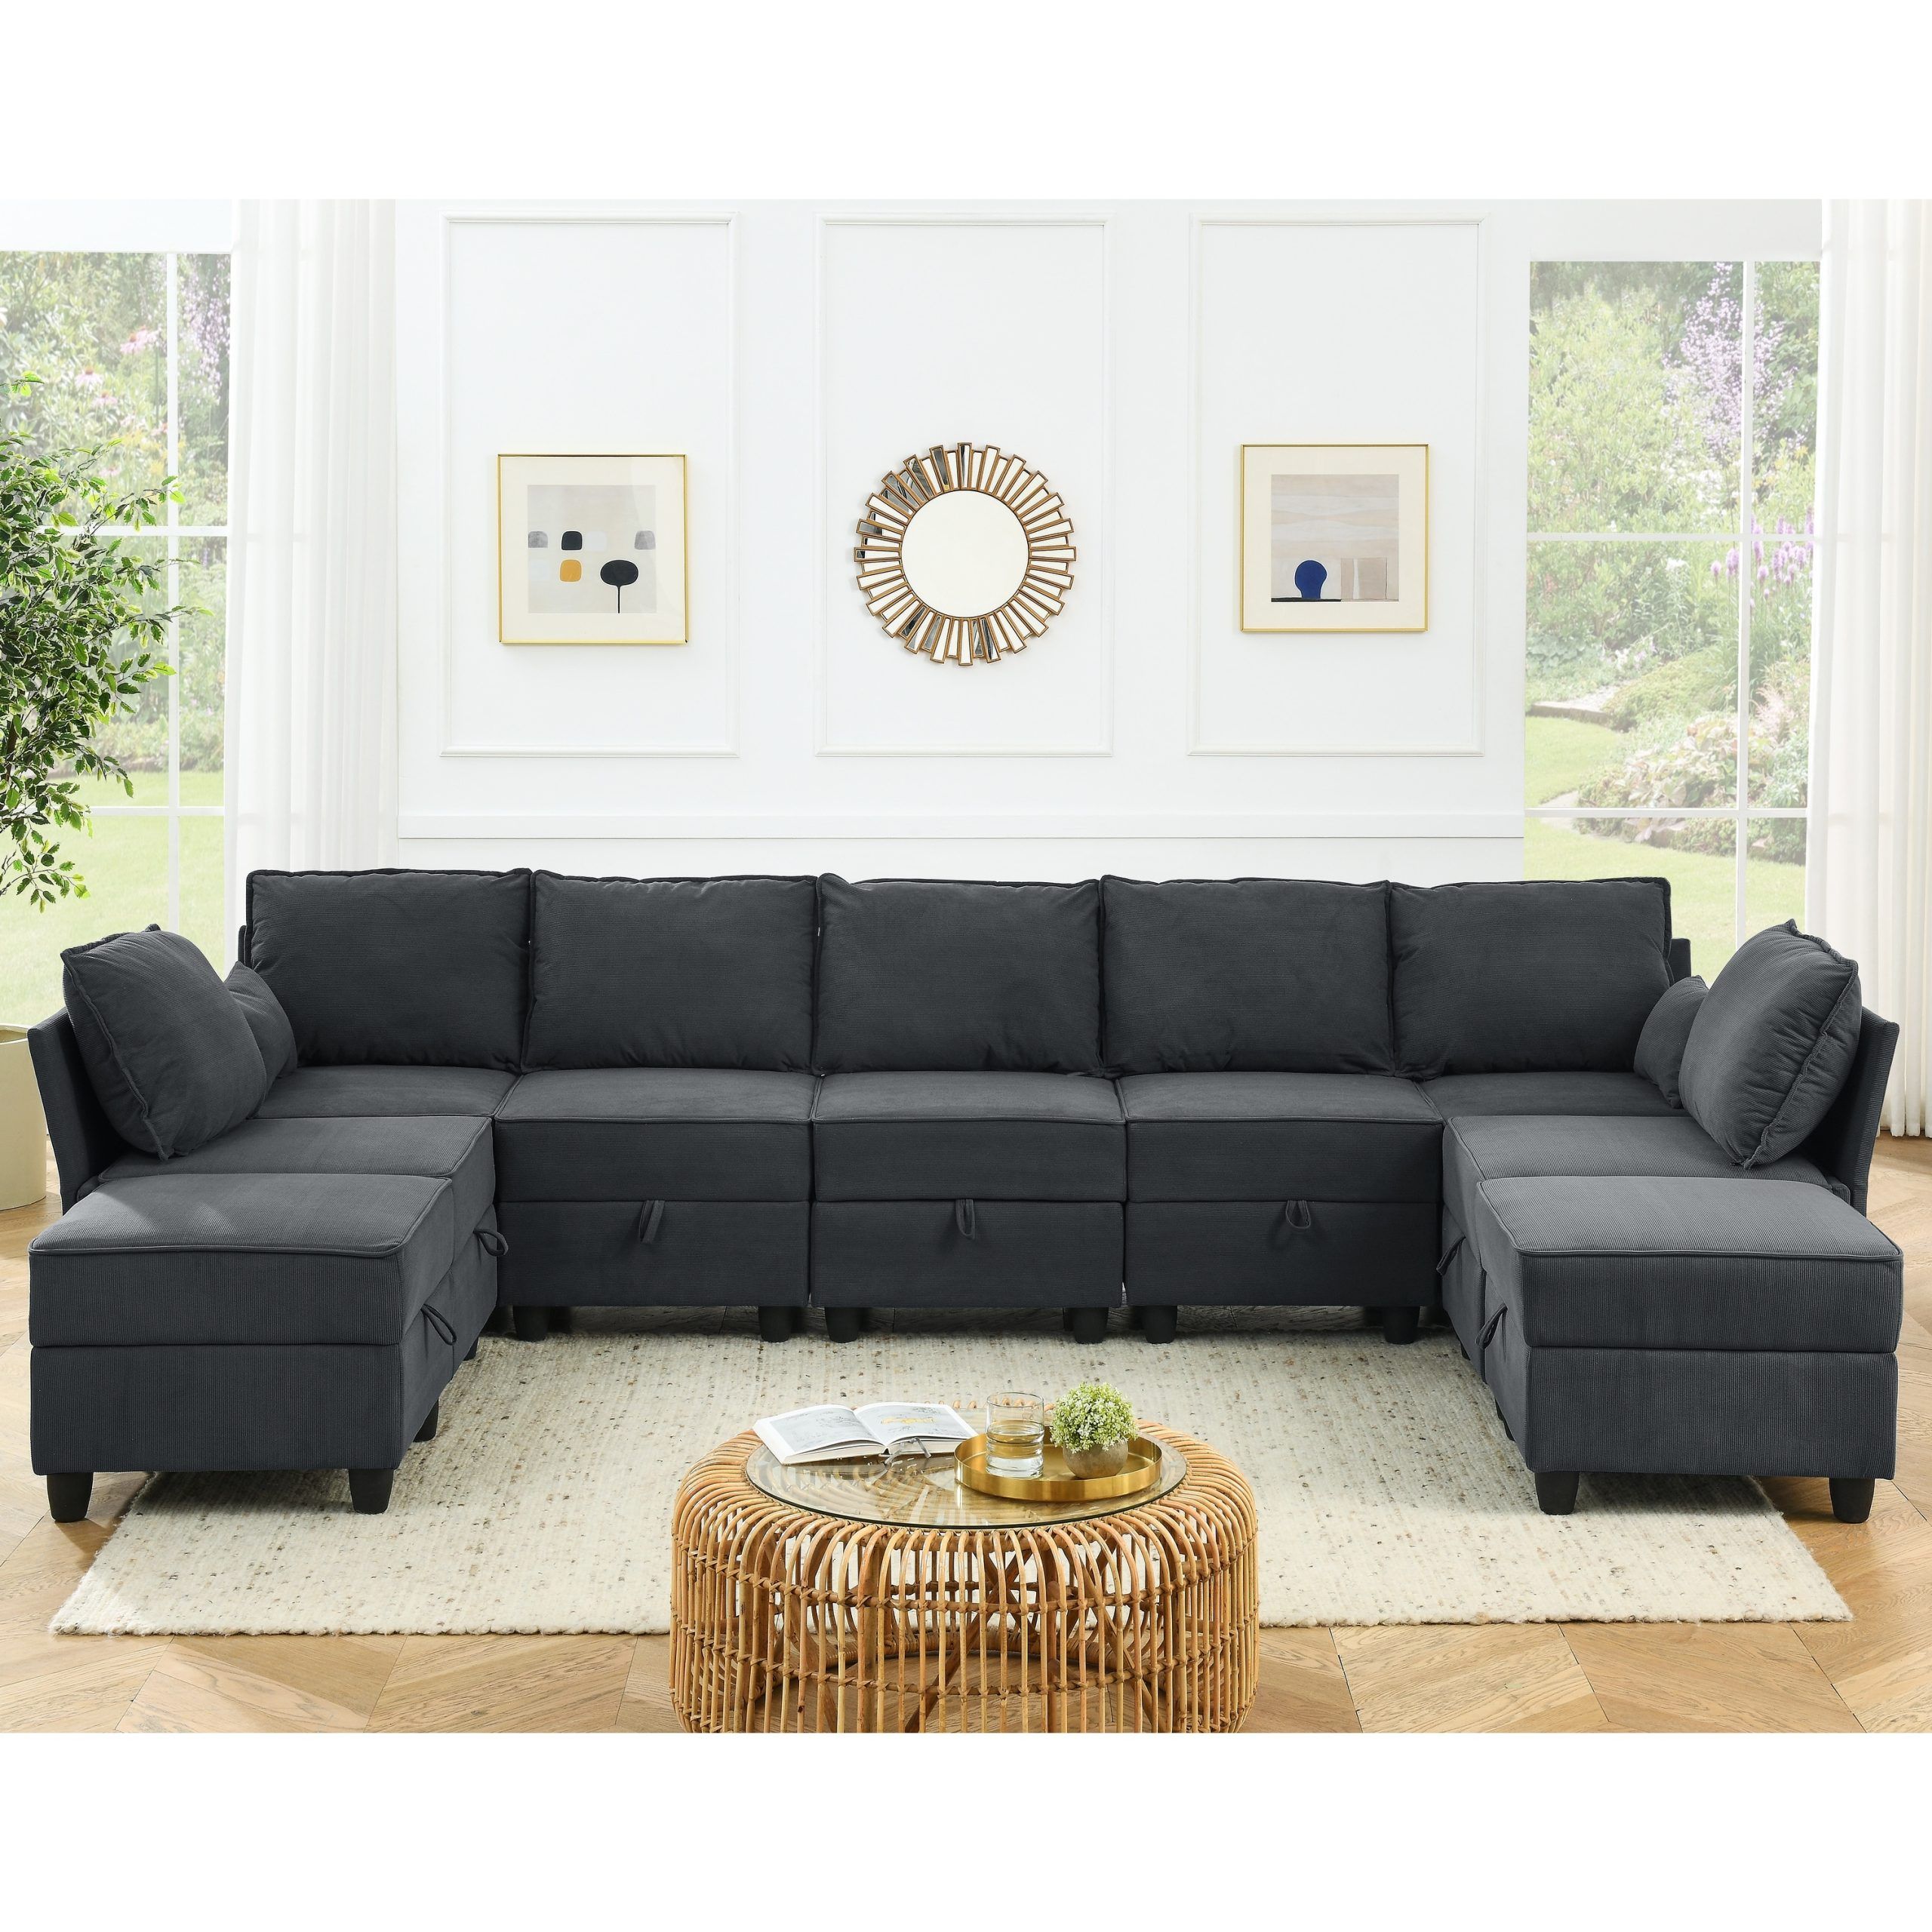 9 Seat Modular Sofa Set, Storage Sectional Sofa Couch Convertible King Sofa  Bed For Living Room, Dark Gray Corduroy Velvet – On Sale – Bed Bath &  Beyond – 39020455 With Regard To Dark Gray Sectional Sofas (View 2 of 15)